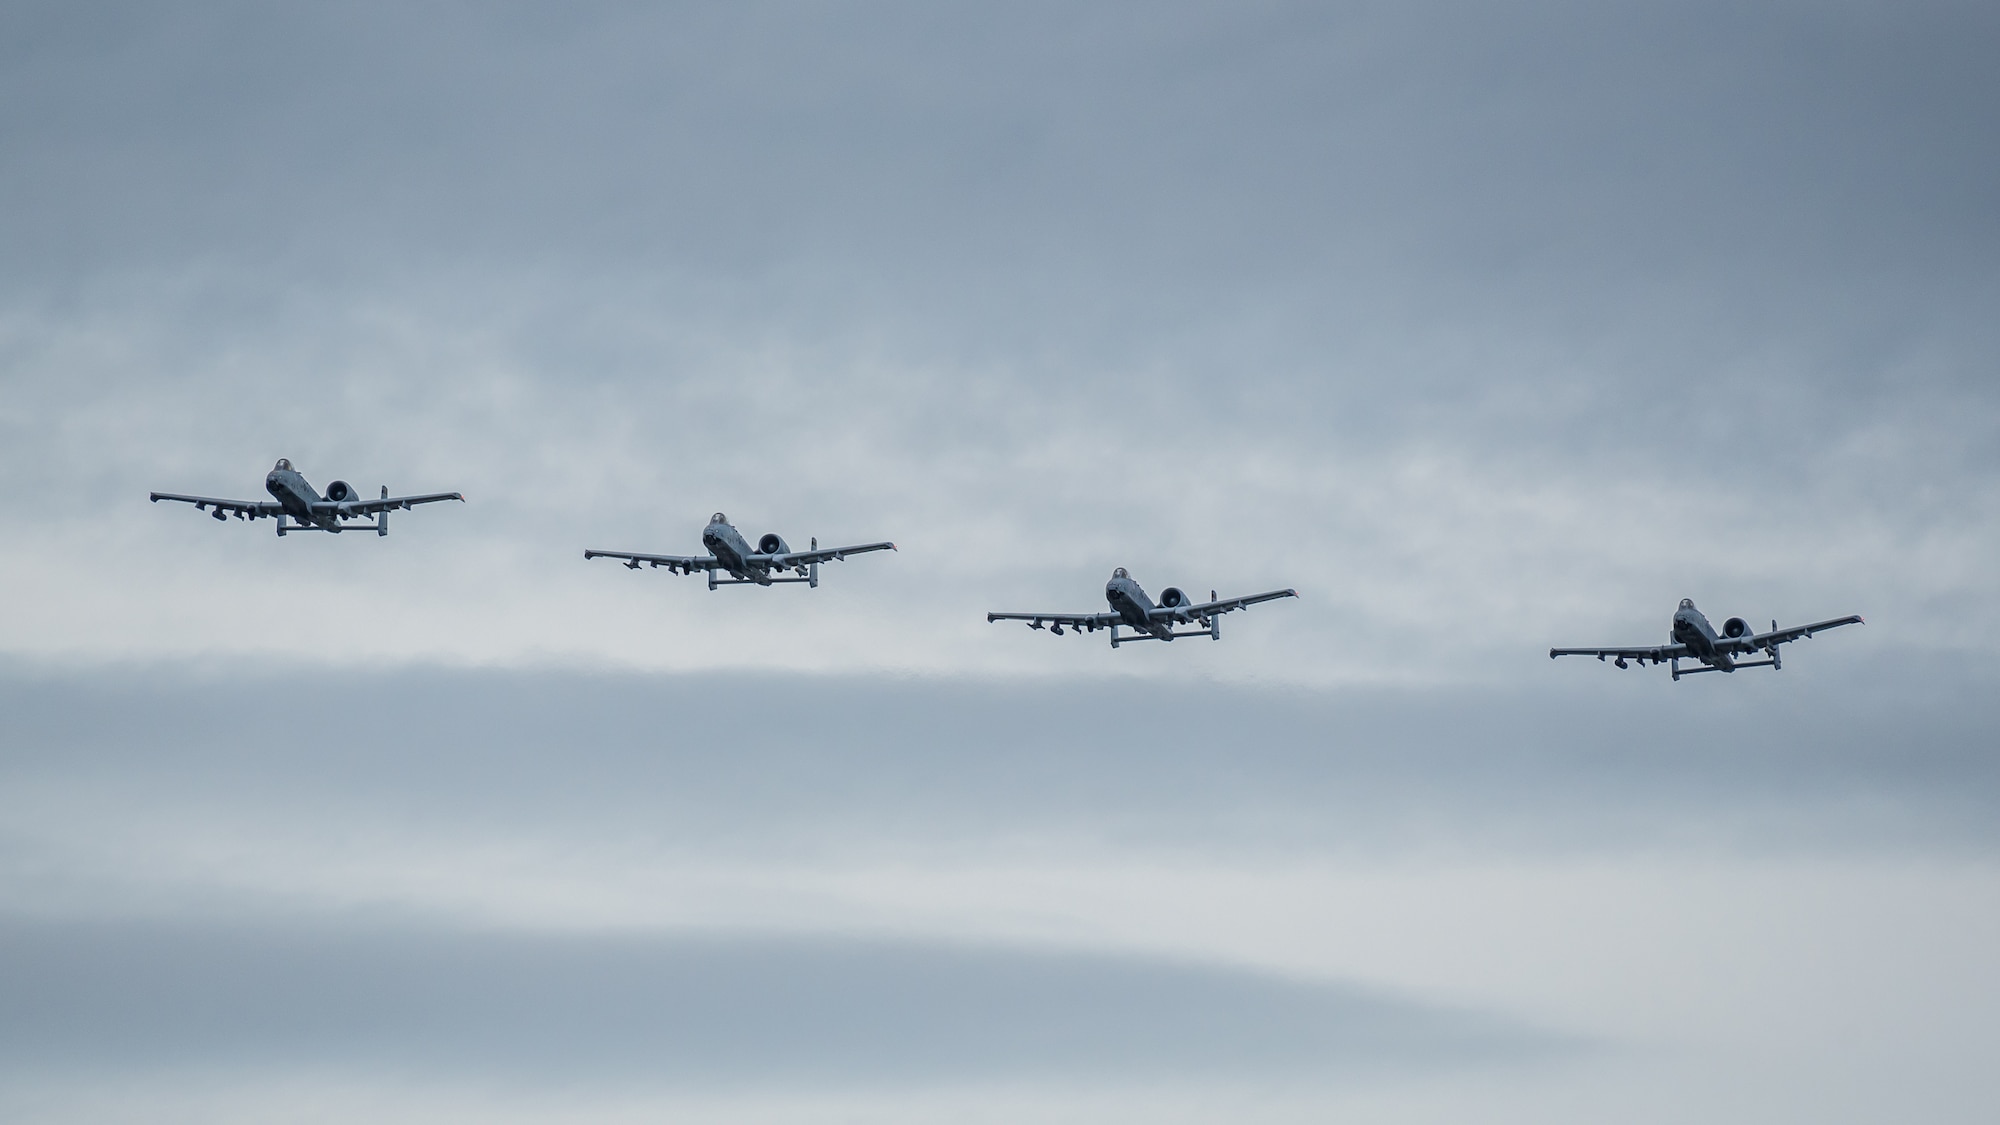 A team of U.S. Air Force A-10 Thunderbolt II aircraft approach the show box over the Ohio River during the Thunder Over Louisville airshow in Louisville, Ky., April 13, 2019. The Kentucky Air National Guard once again served as the base of operations for military aircraft participating in the annual event, which has grown to become one of the largest single-day air shows in North America. (U.S. Air National Guard photo by Dale Greer)